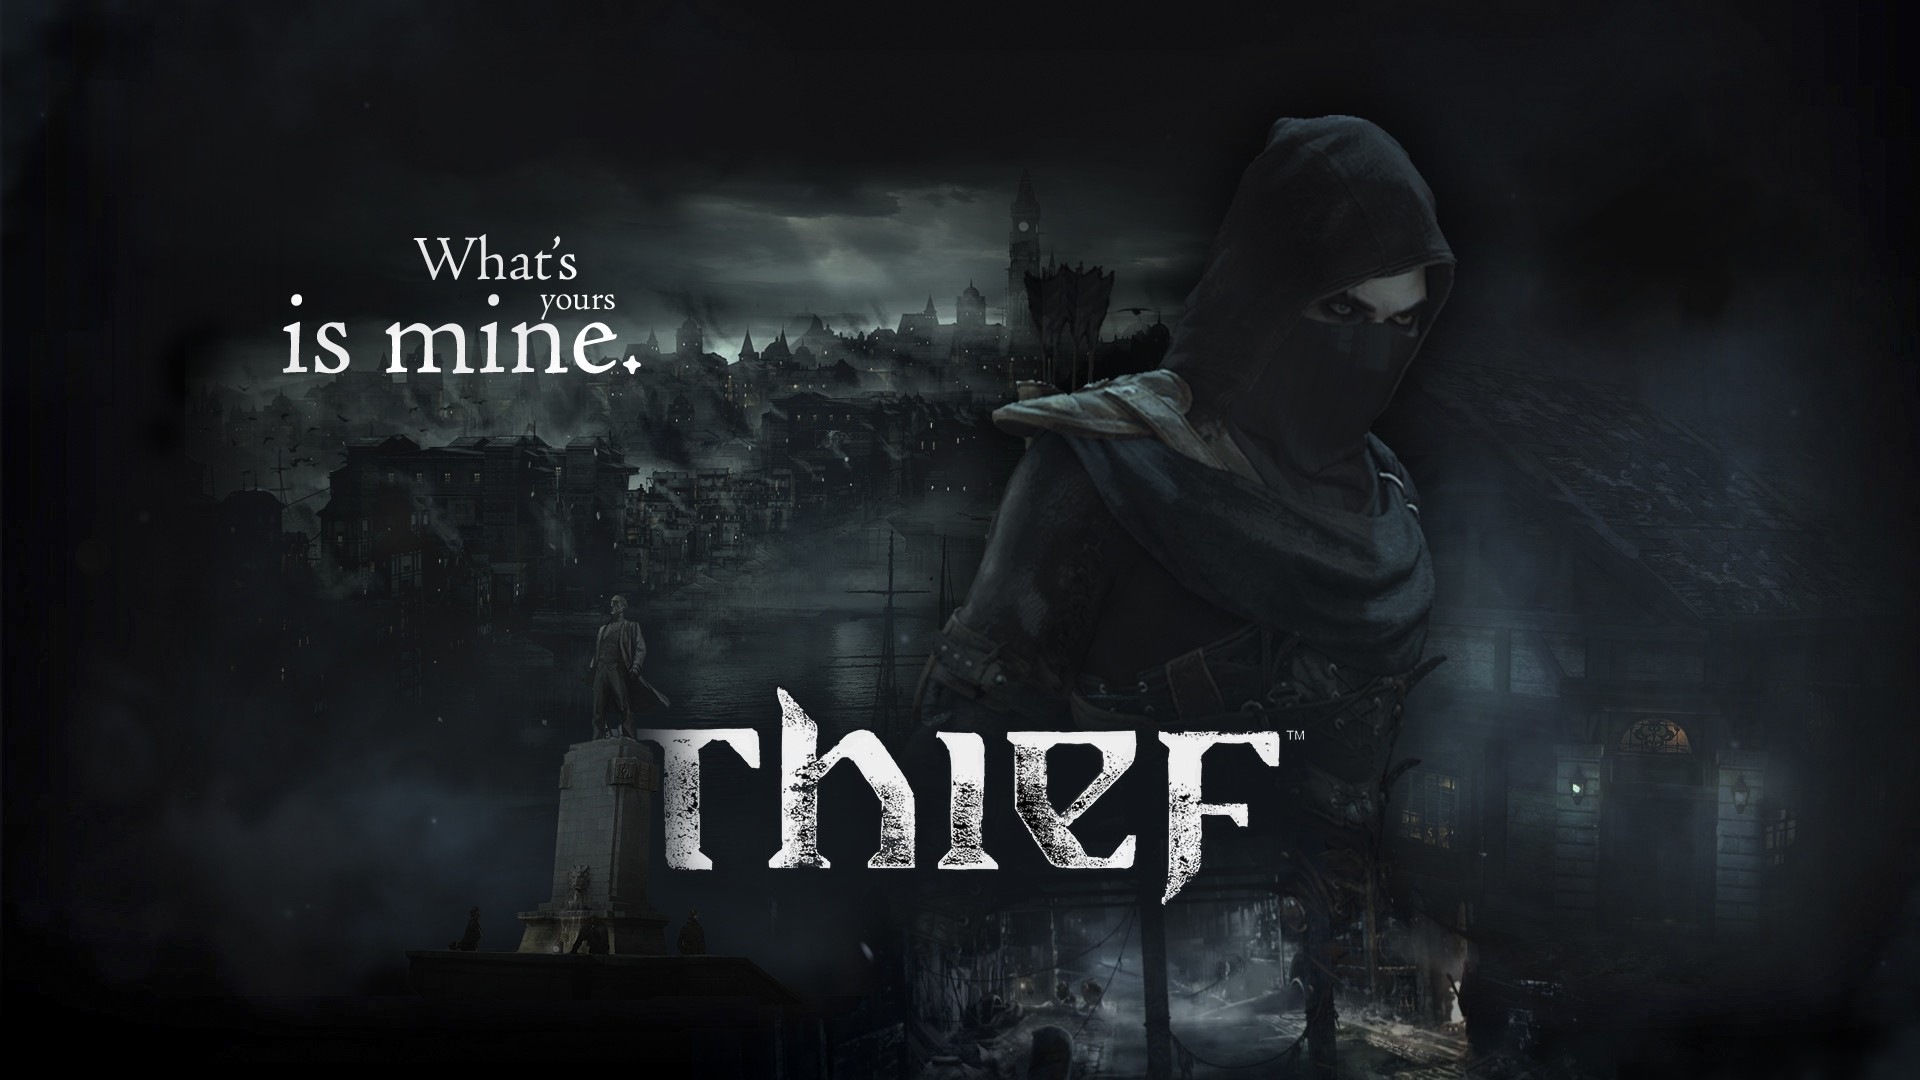 1920x1080 Awesome Free Thief Game Images | Free Thief Game Wallpapers